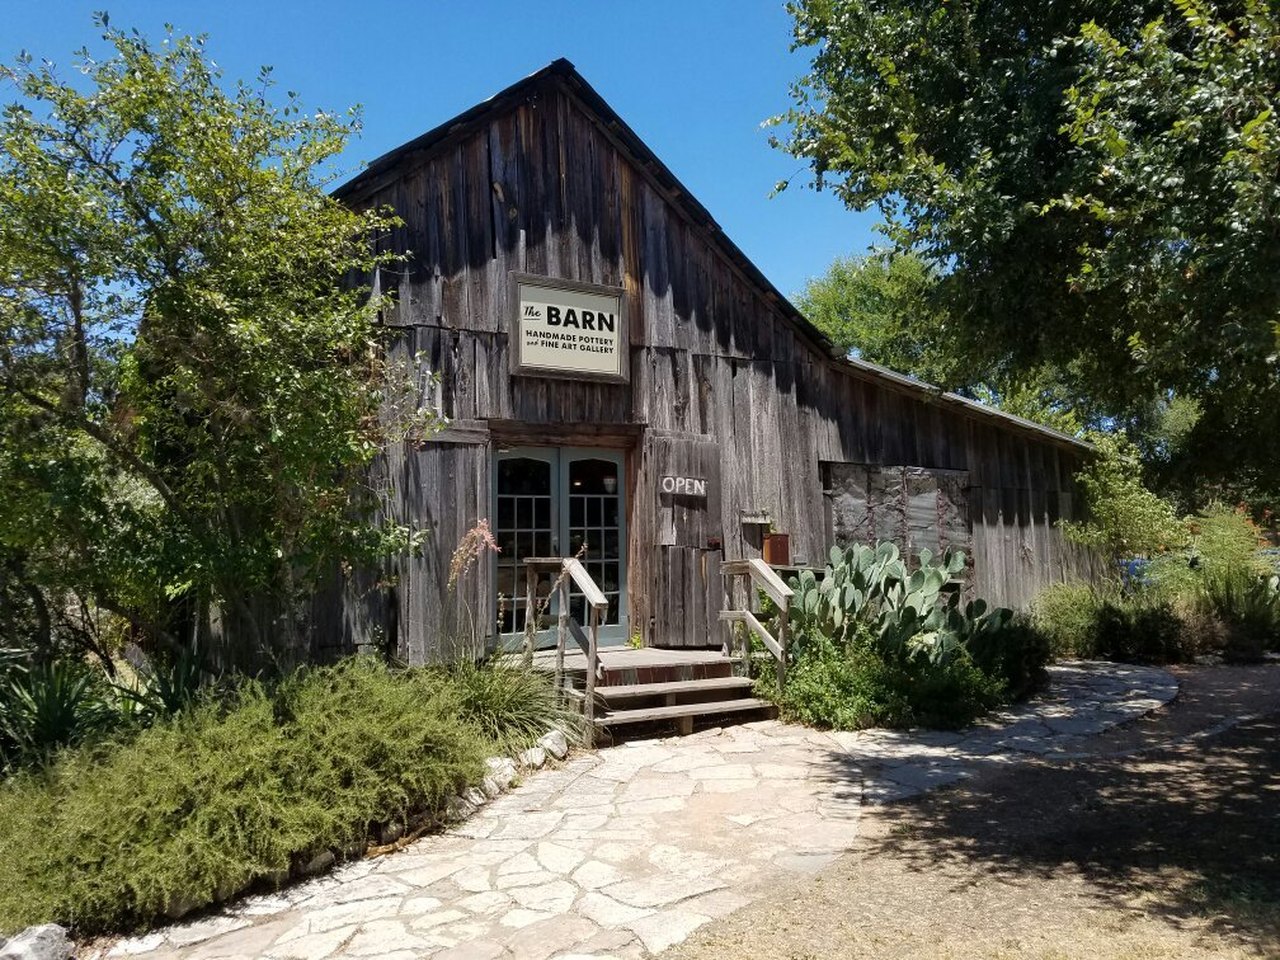 The Barn Makes The Best Handcrafted Pottery Around Austin